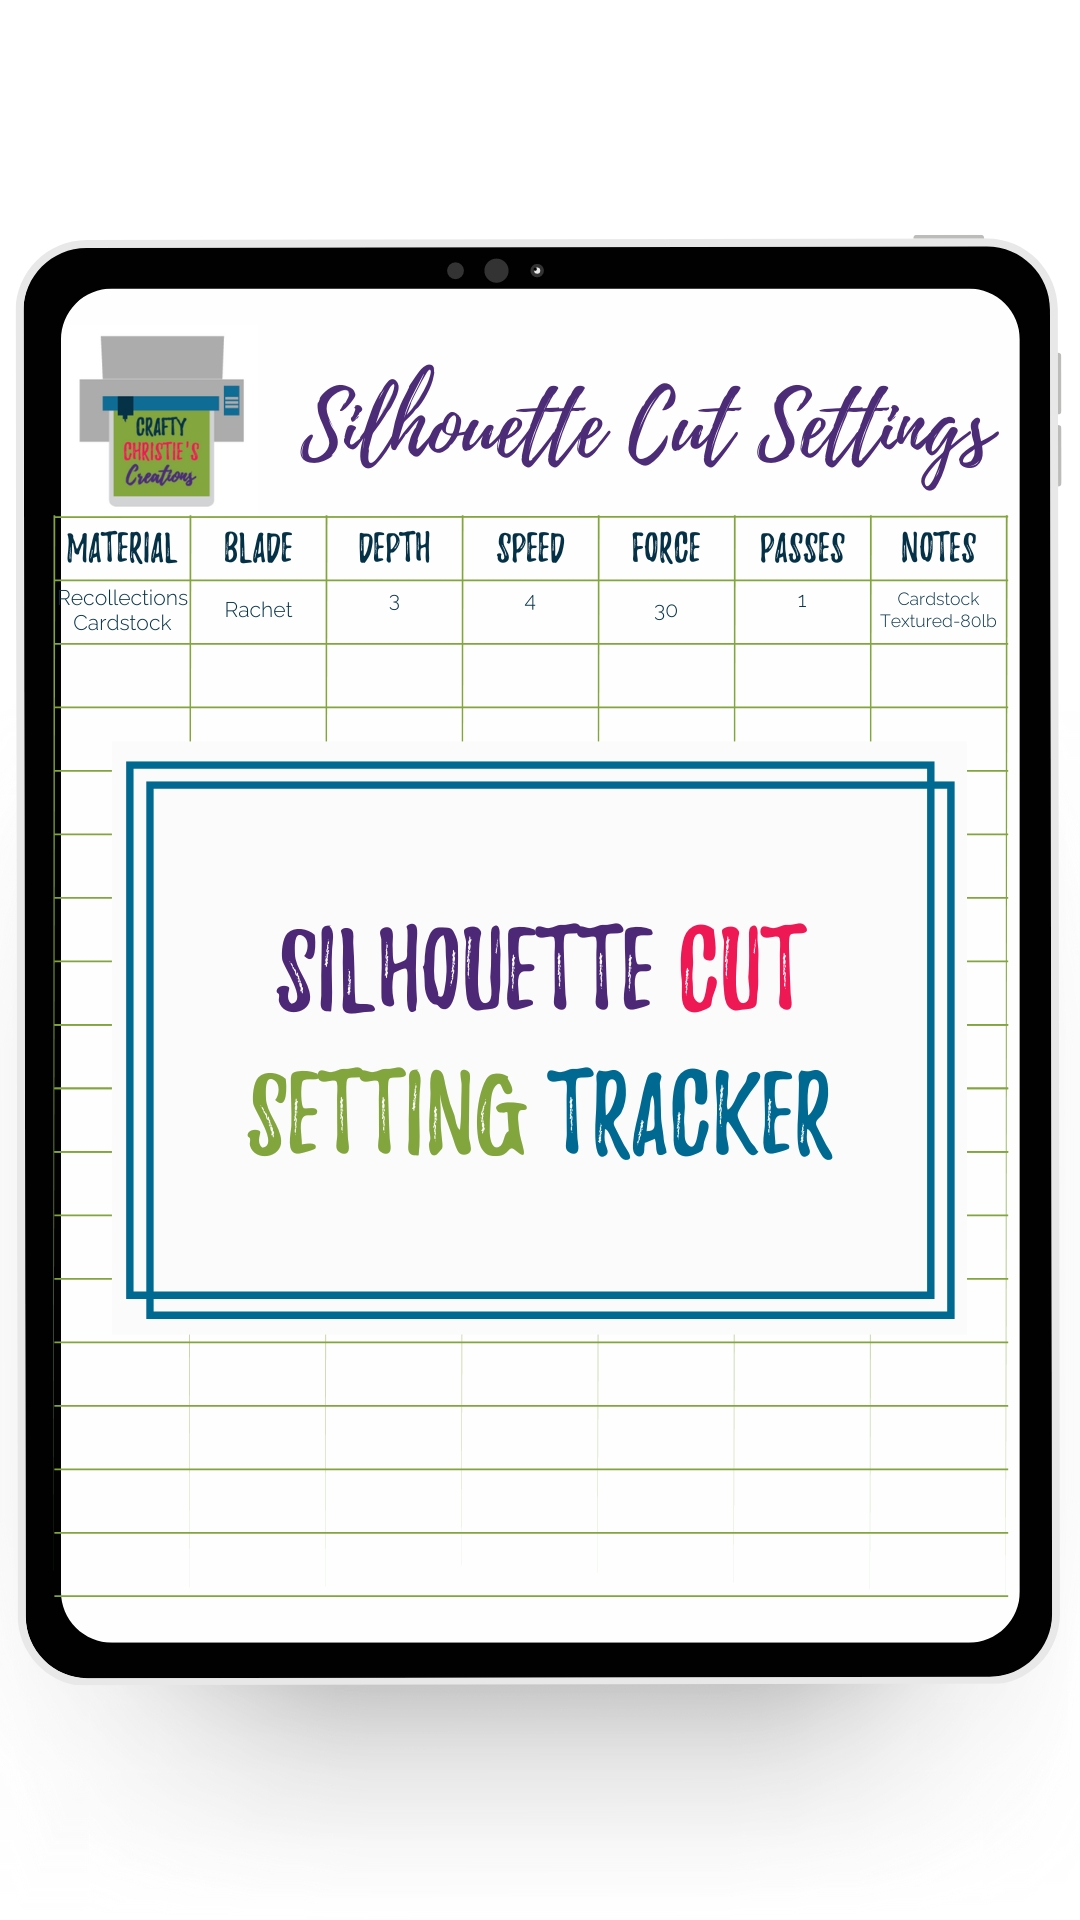 Use this Silhouette cut setting tracker to keep all your cut settings in one place.